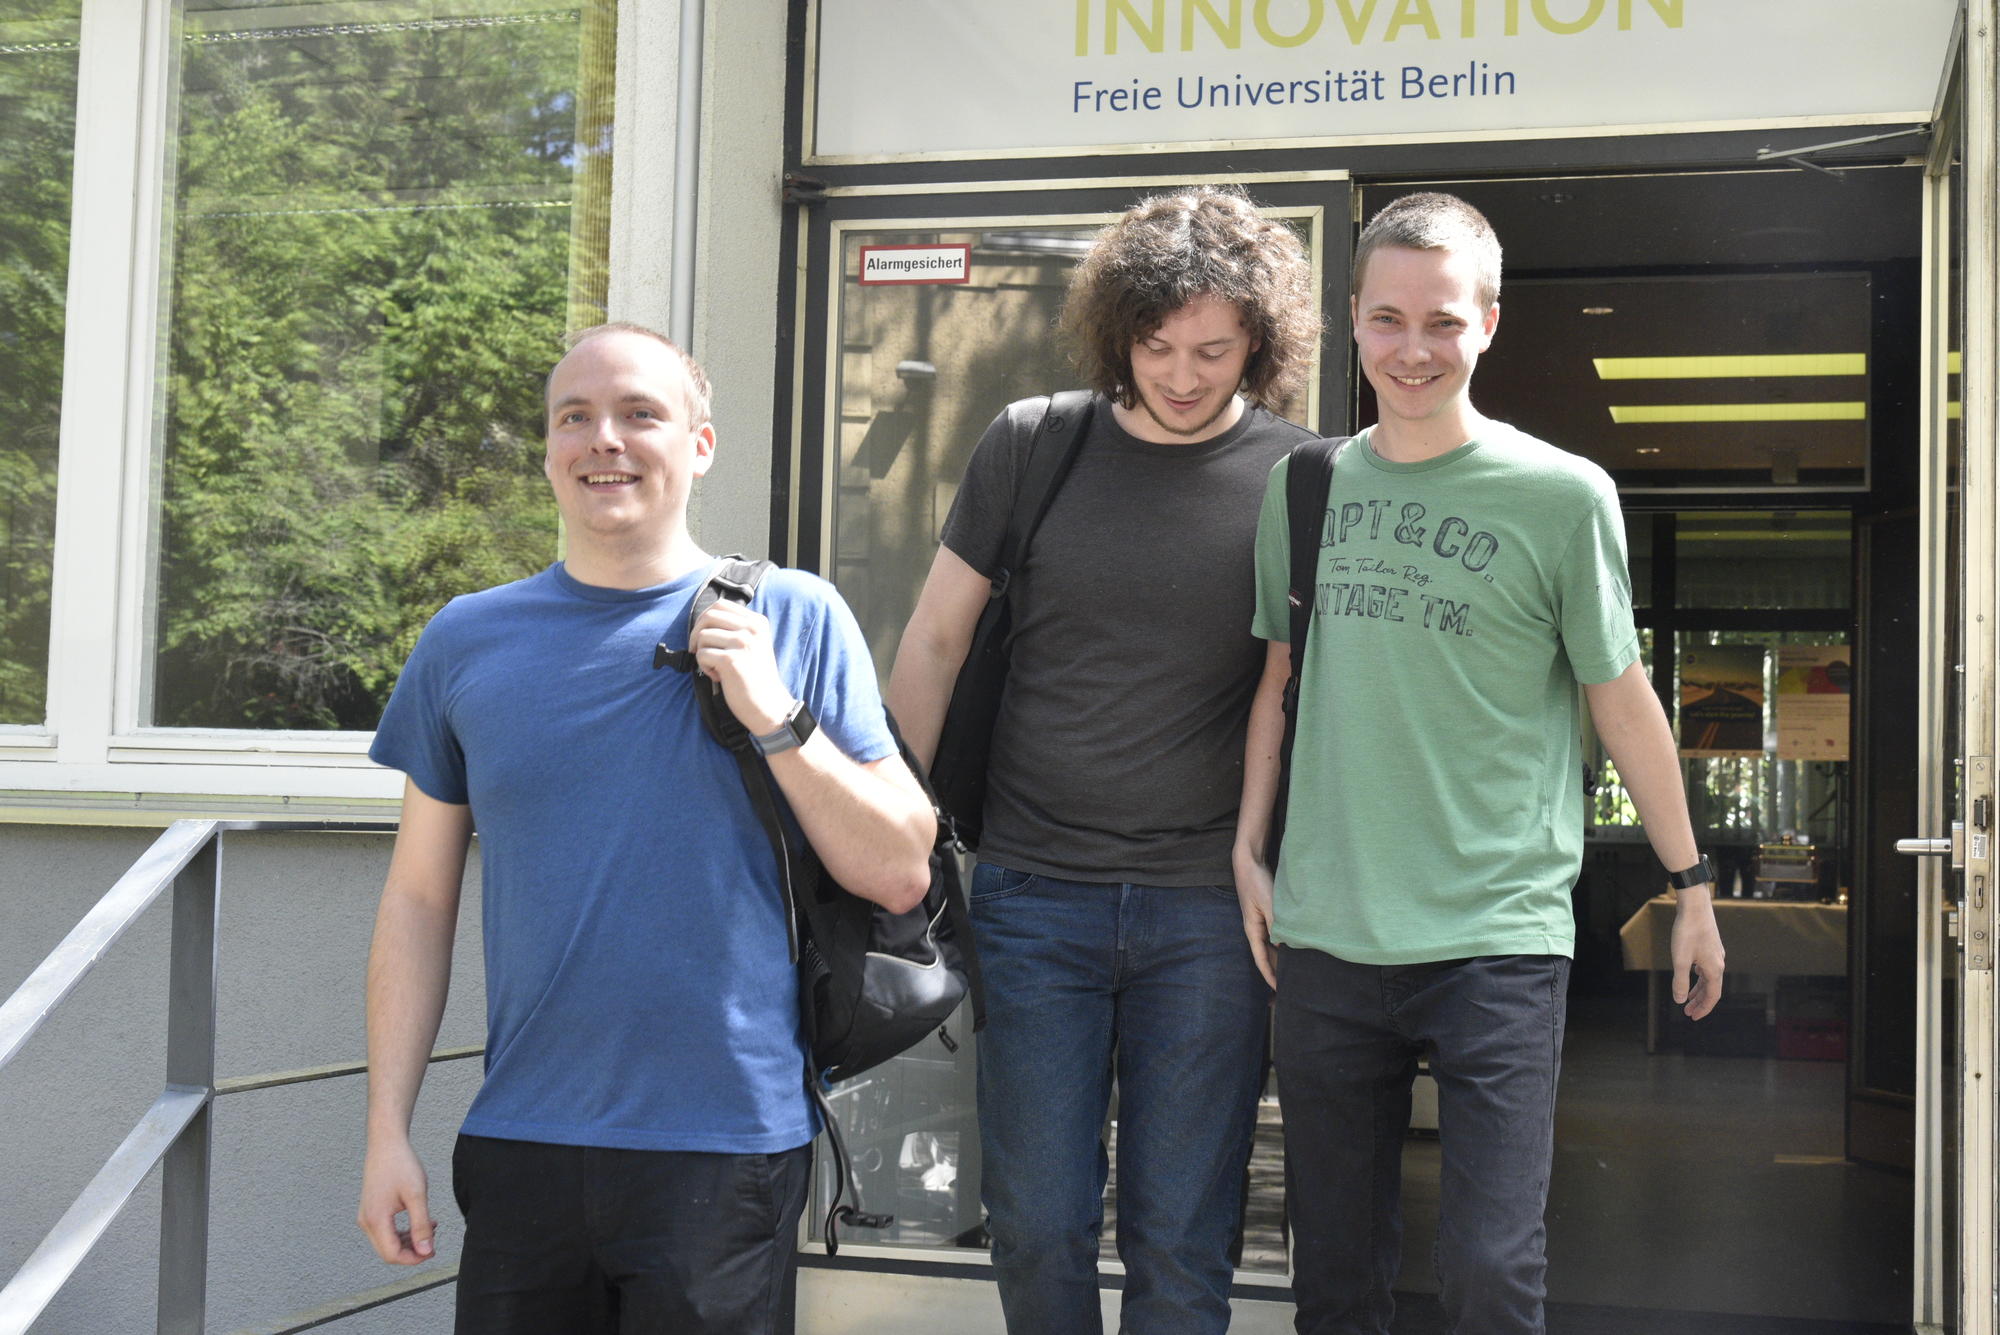 Andreas Ganske, Simon Kempendorf, and Fabio Tacke from Humboldt-Universität zu Berlin are competing under the team name “Let’s meet.”